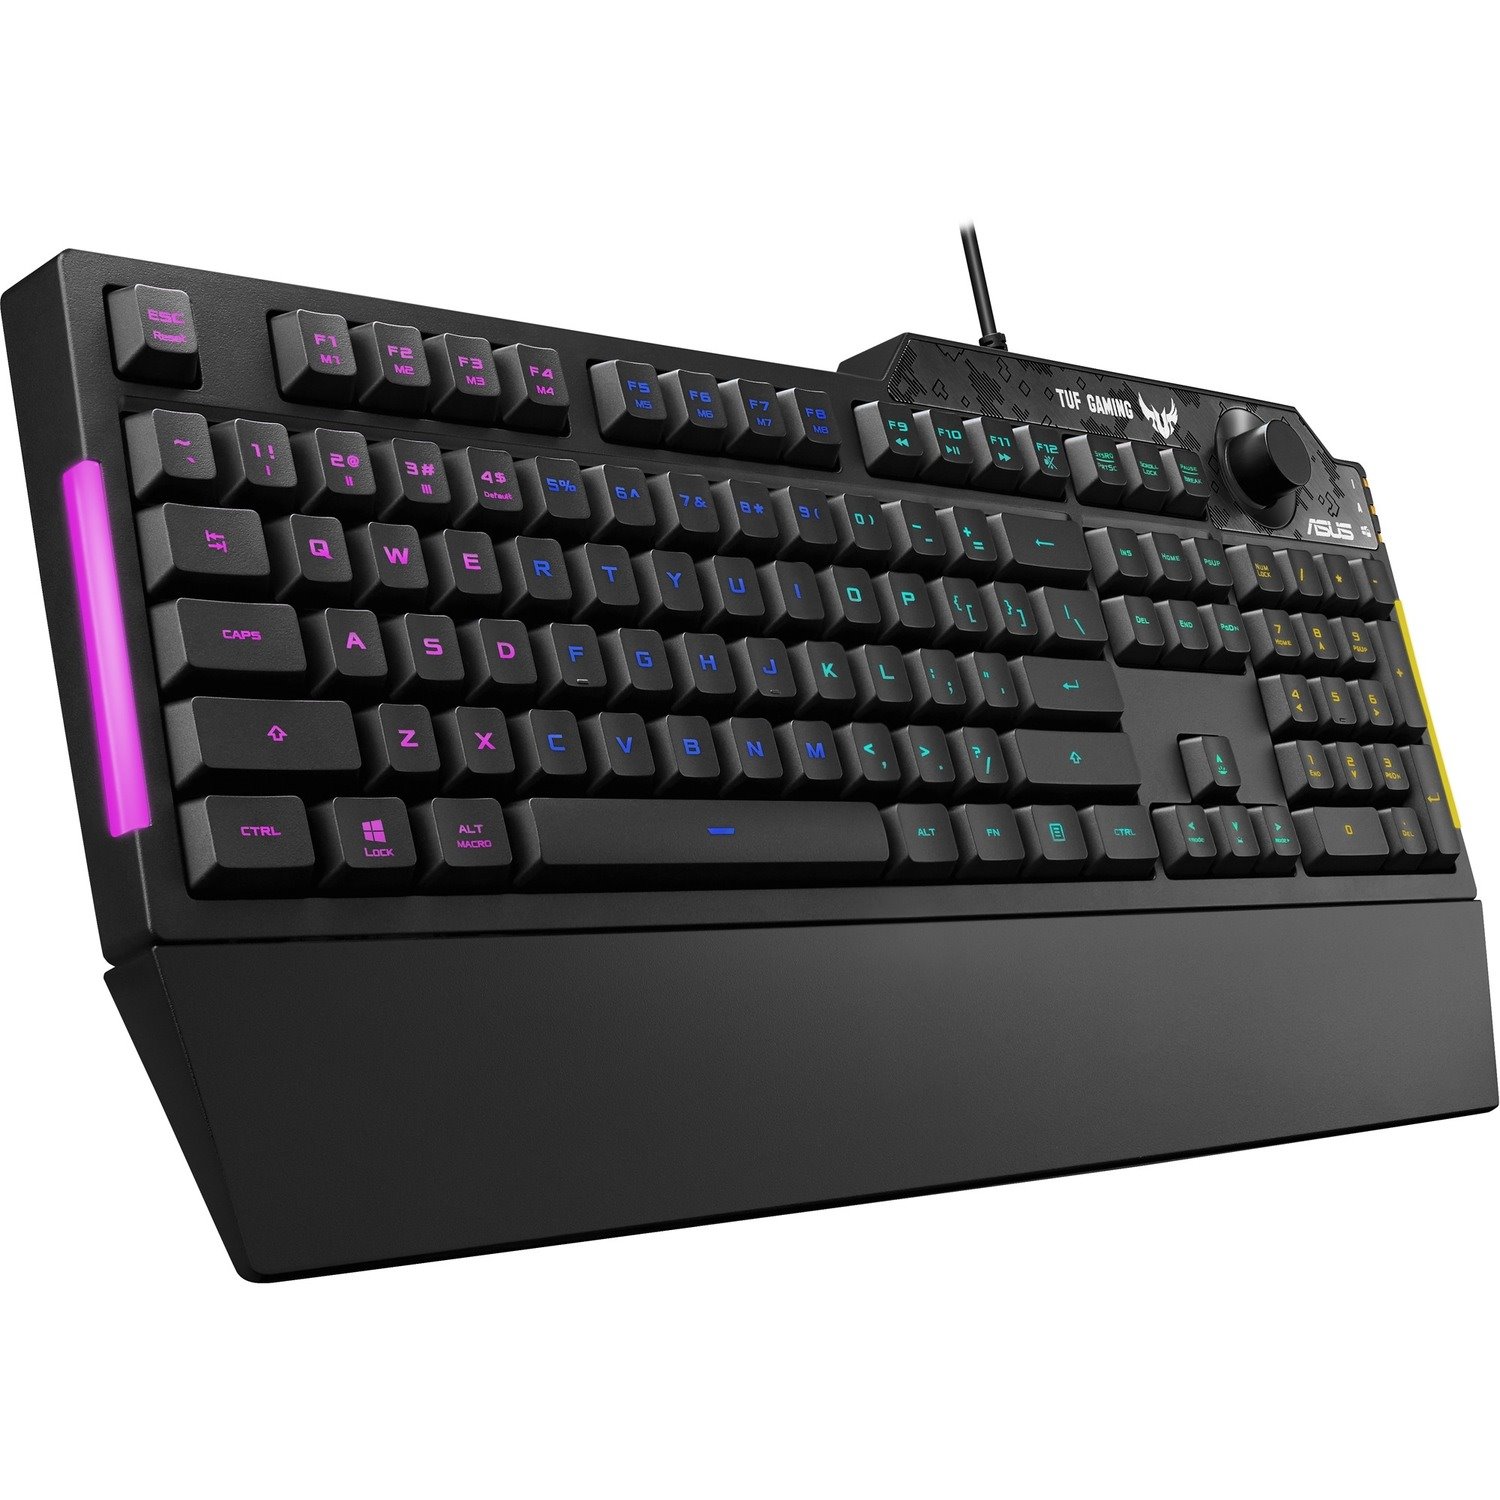 TUF Gaming Keyboard - Cable Connectivity - USB 2.0 Interface - RGB LED - Black